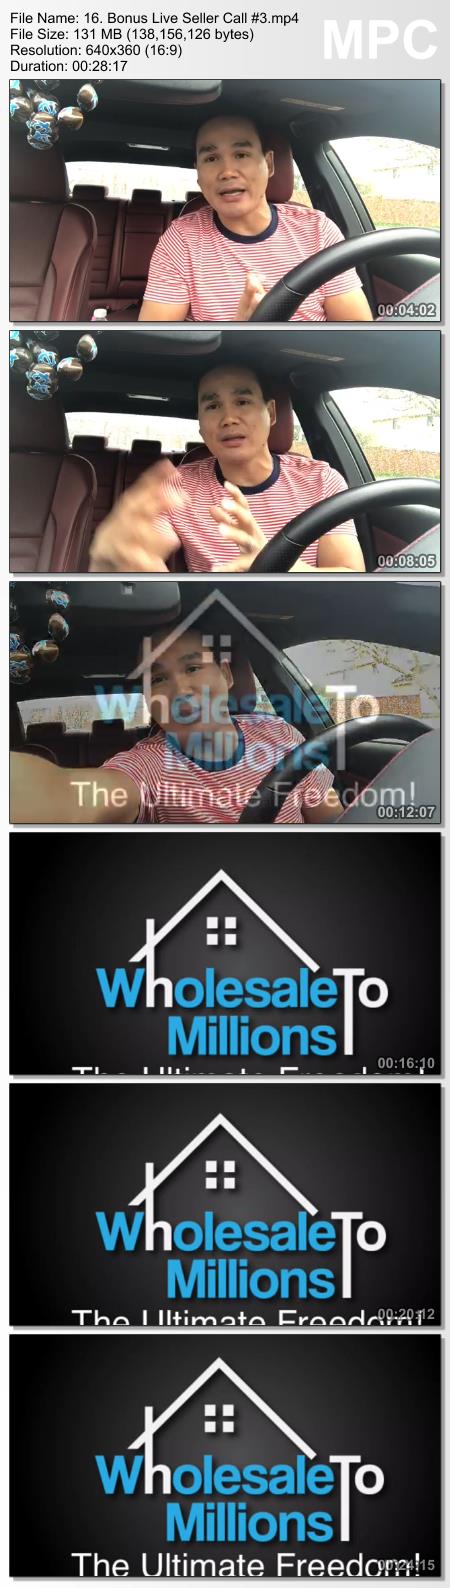 Wholesale to Millions